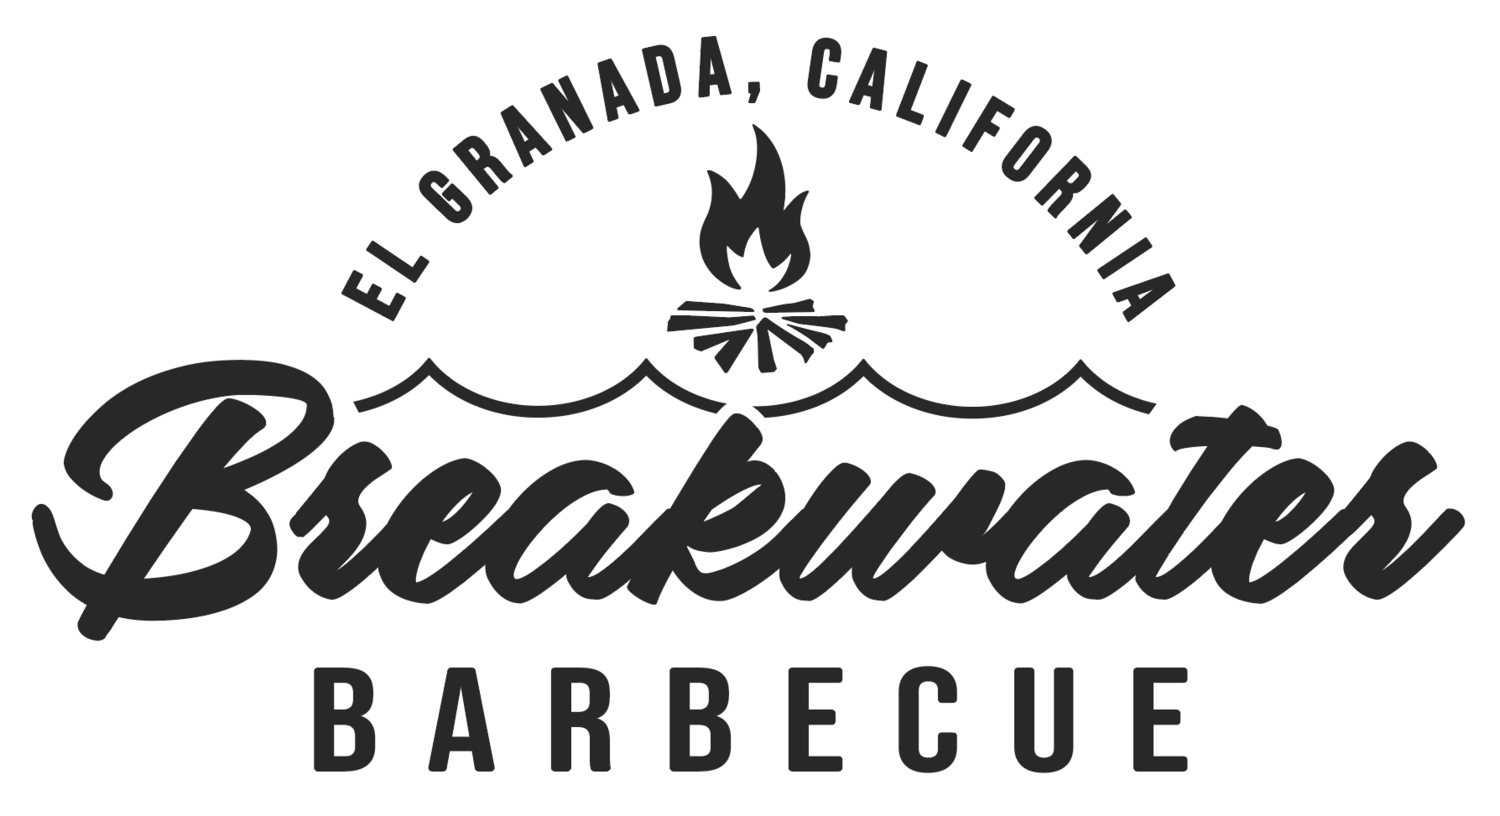 Breakwater Barbecue | Bay Area BBQ and Catering